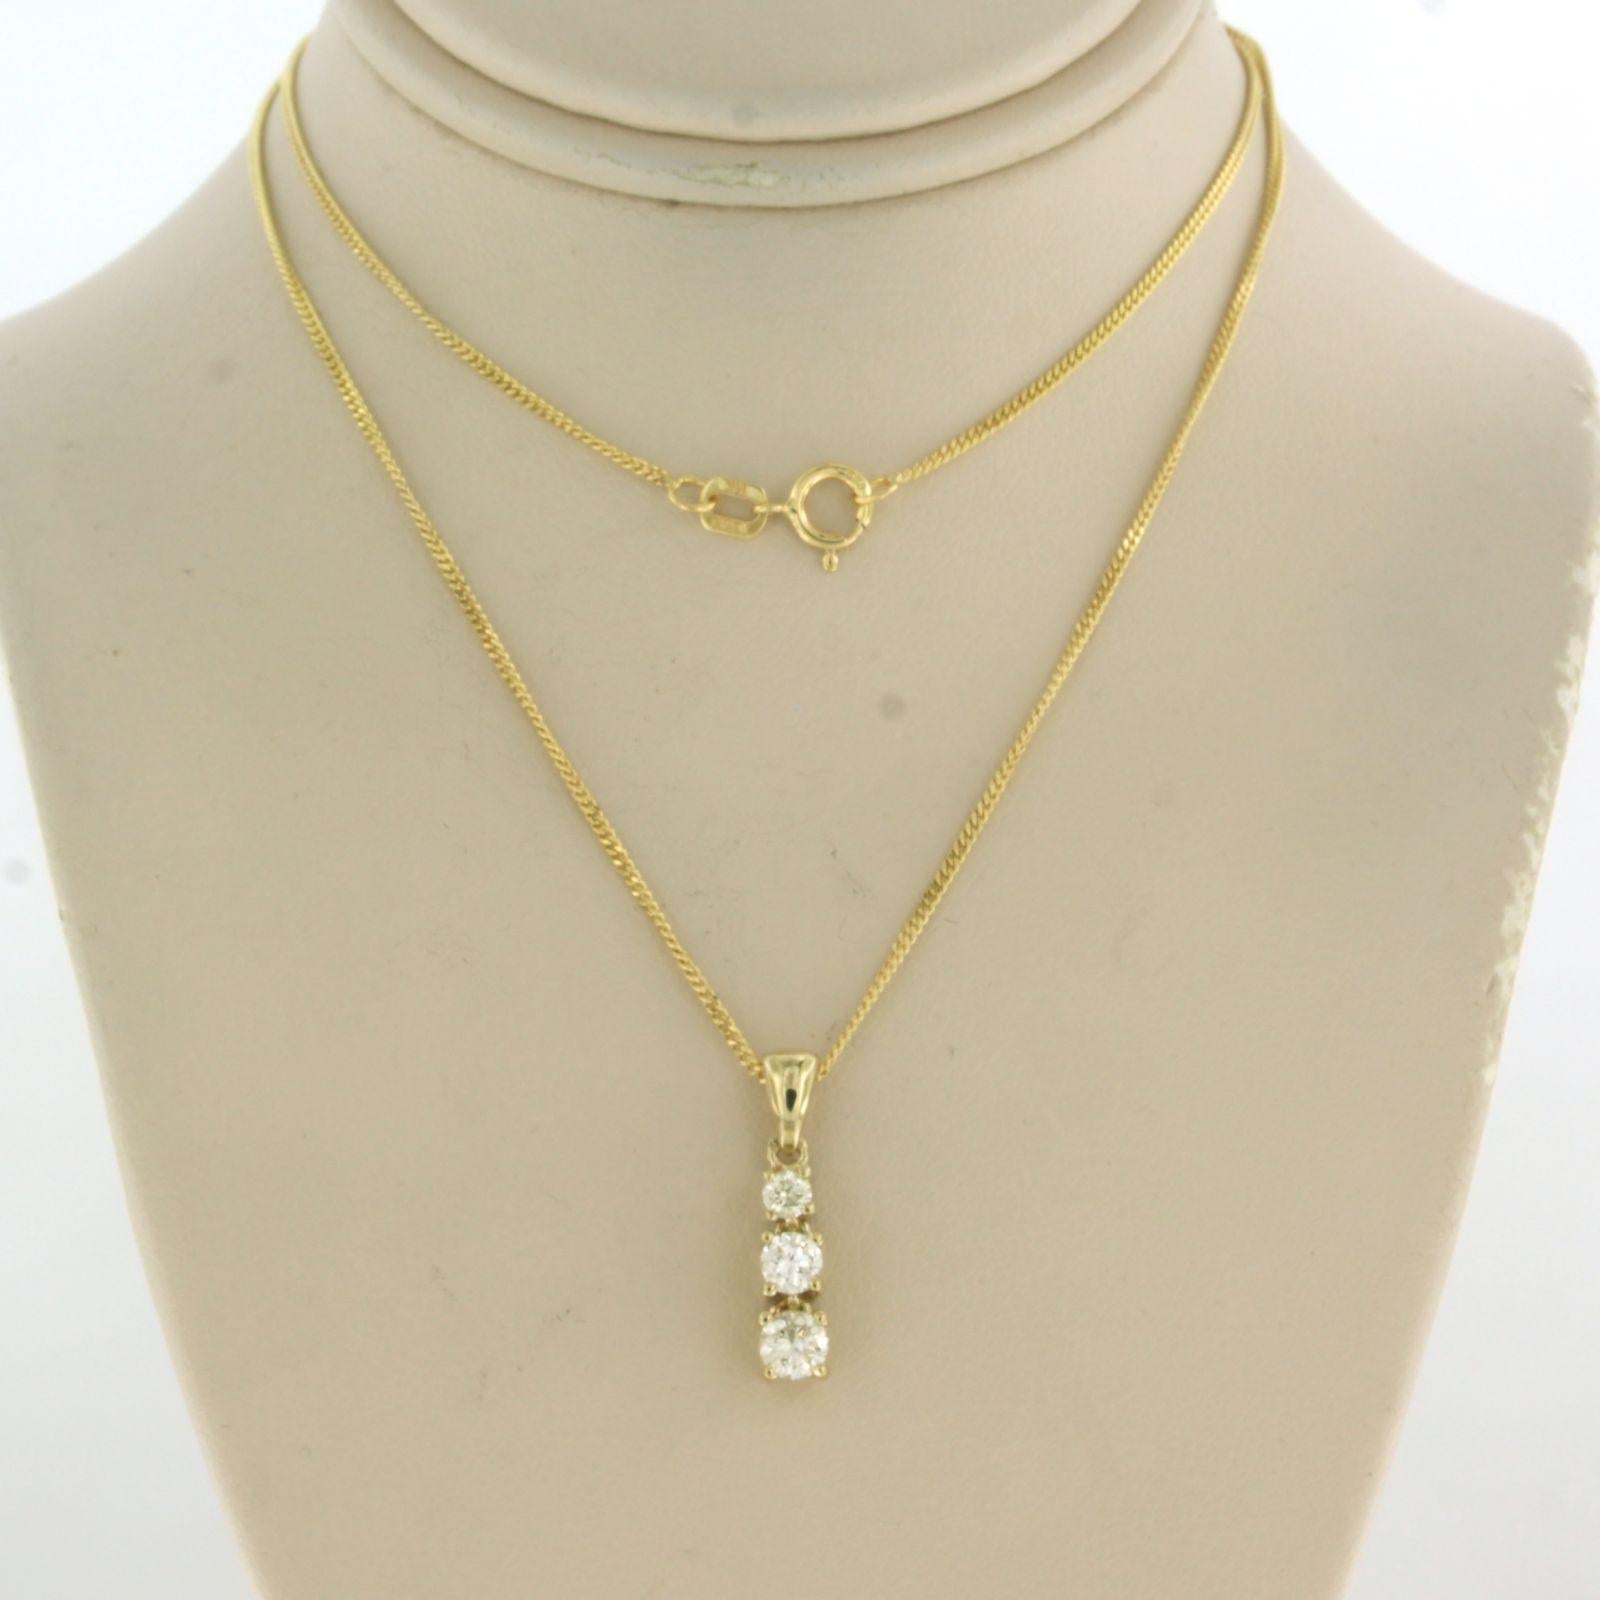 14k yellow gold necklace with pendant set with brilliant cut diamonds up to . 0.40 carat J/K VS/SI - 45 cm

detailed description:

the length of the necklace is 45 cm long by 0.7 mm wide
the size of the pendant is 1.9 cm by 5.0 mm wide

Total weight